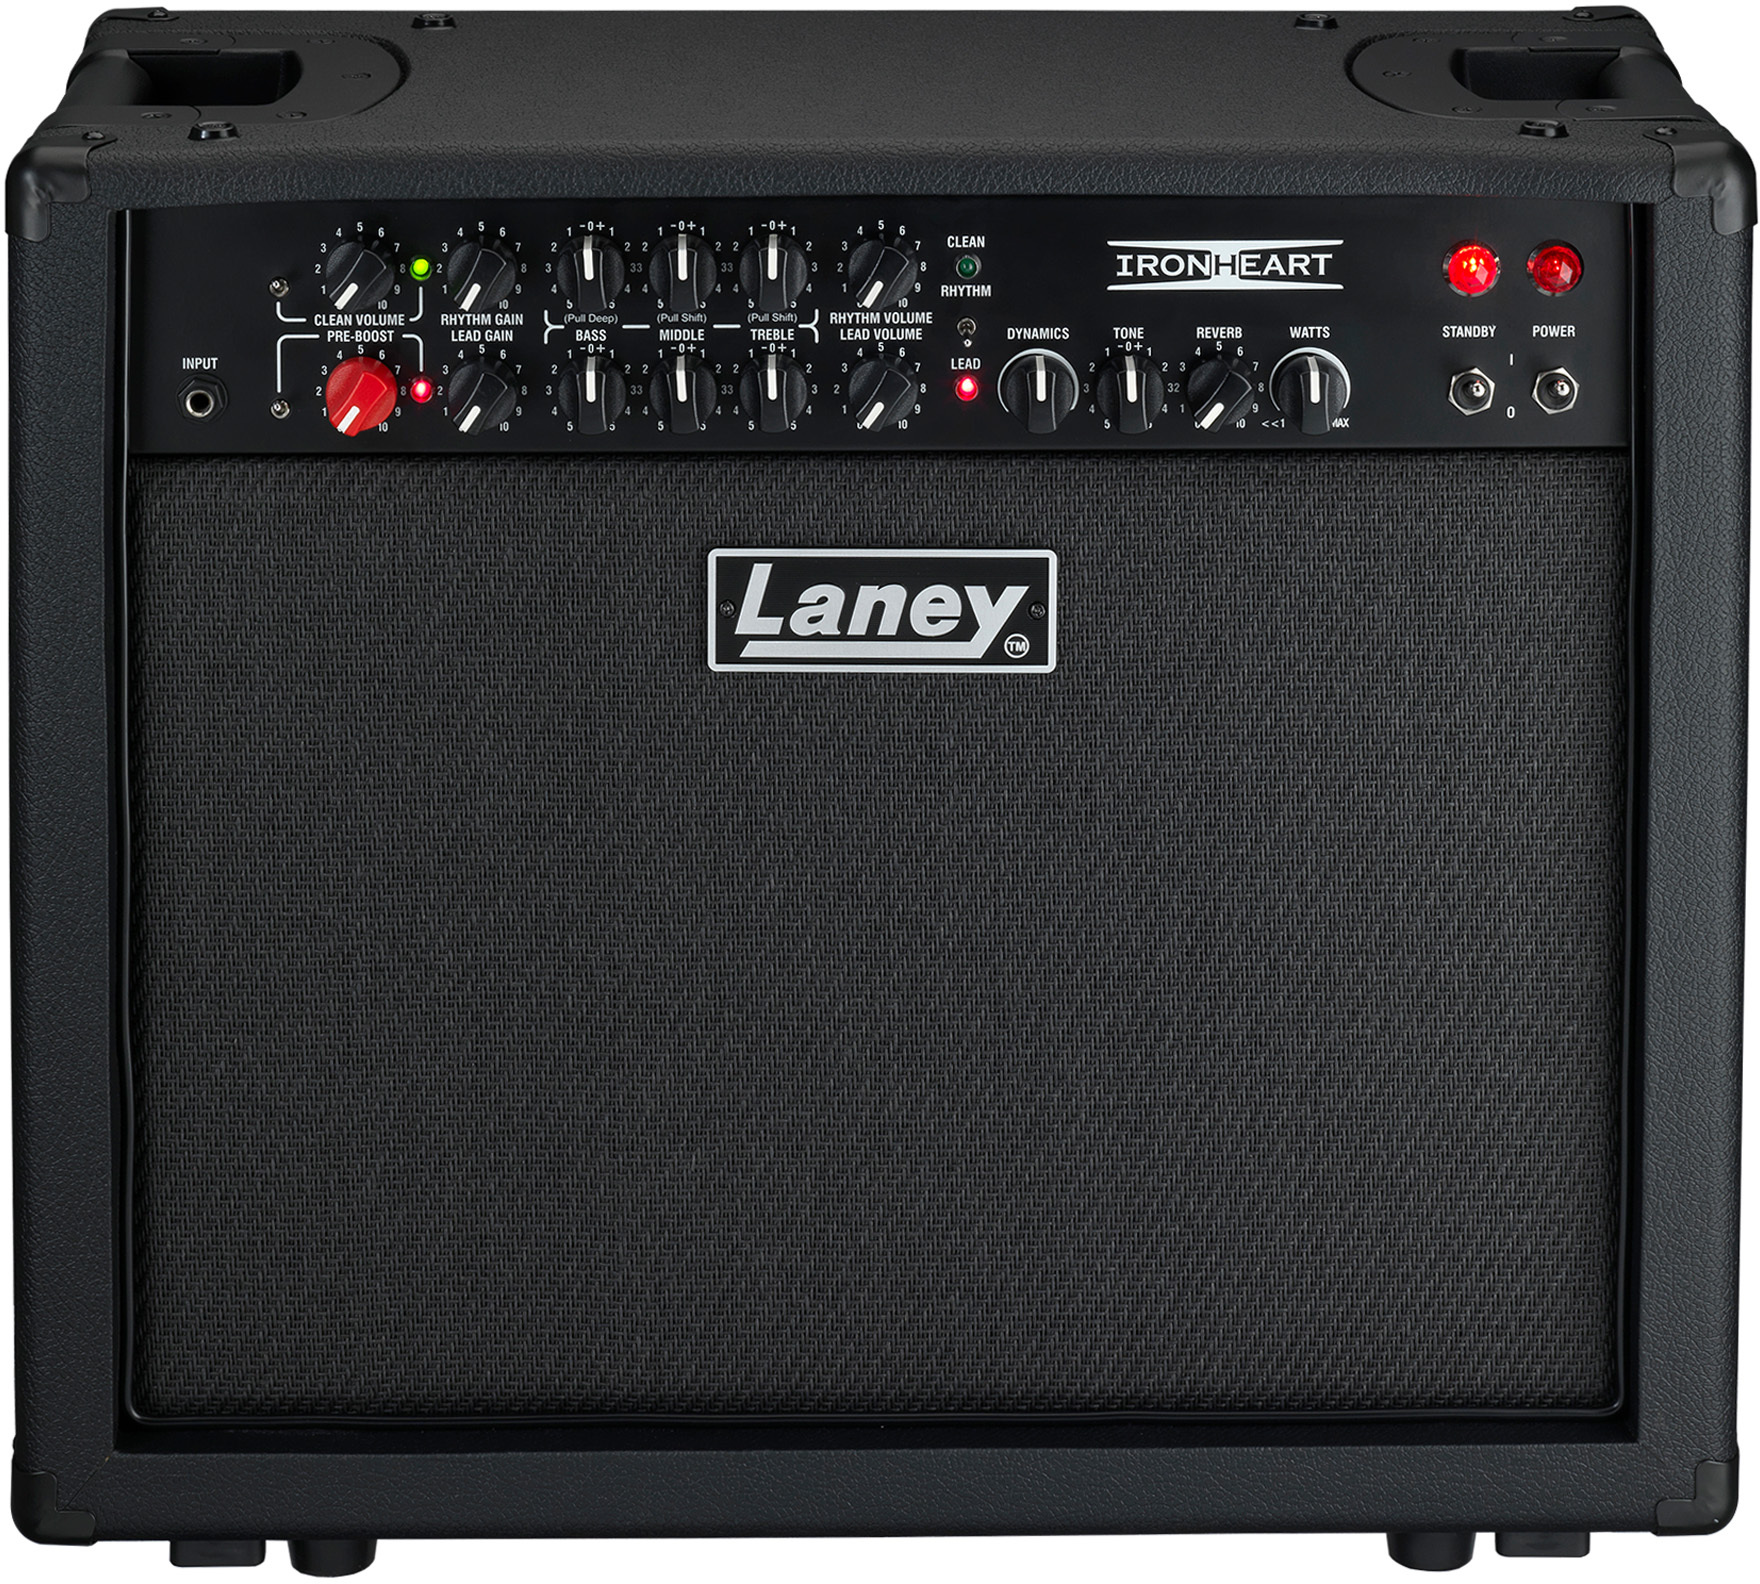 Laney Ironheart Irt30-112 30w 1x12 - Electric guitar combo amp - Main picture